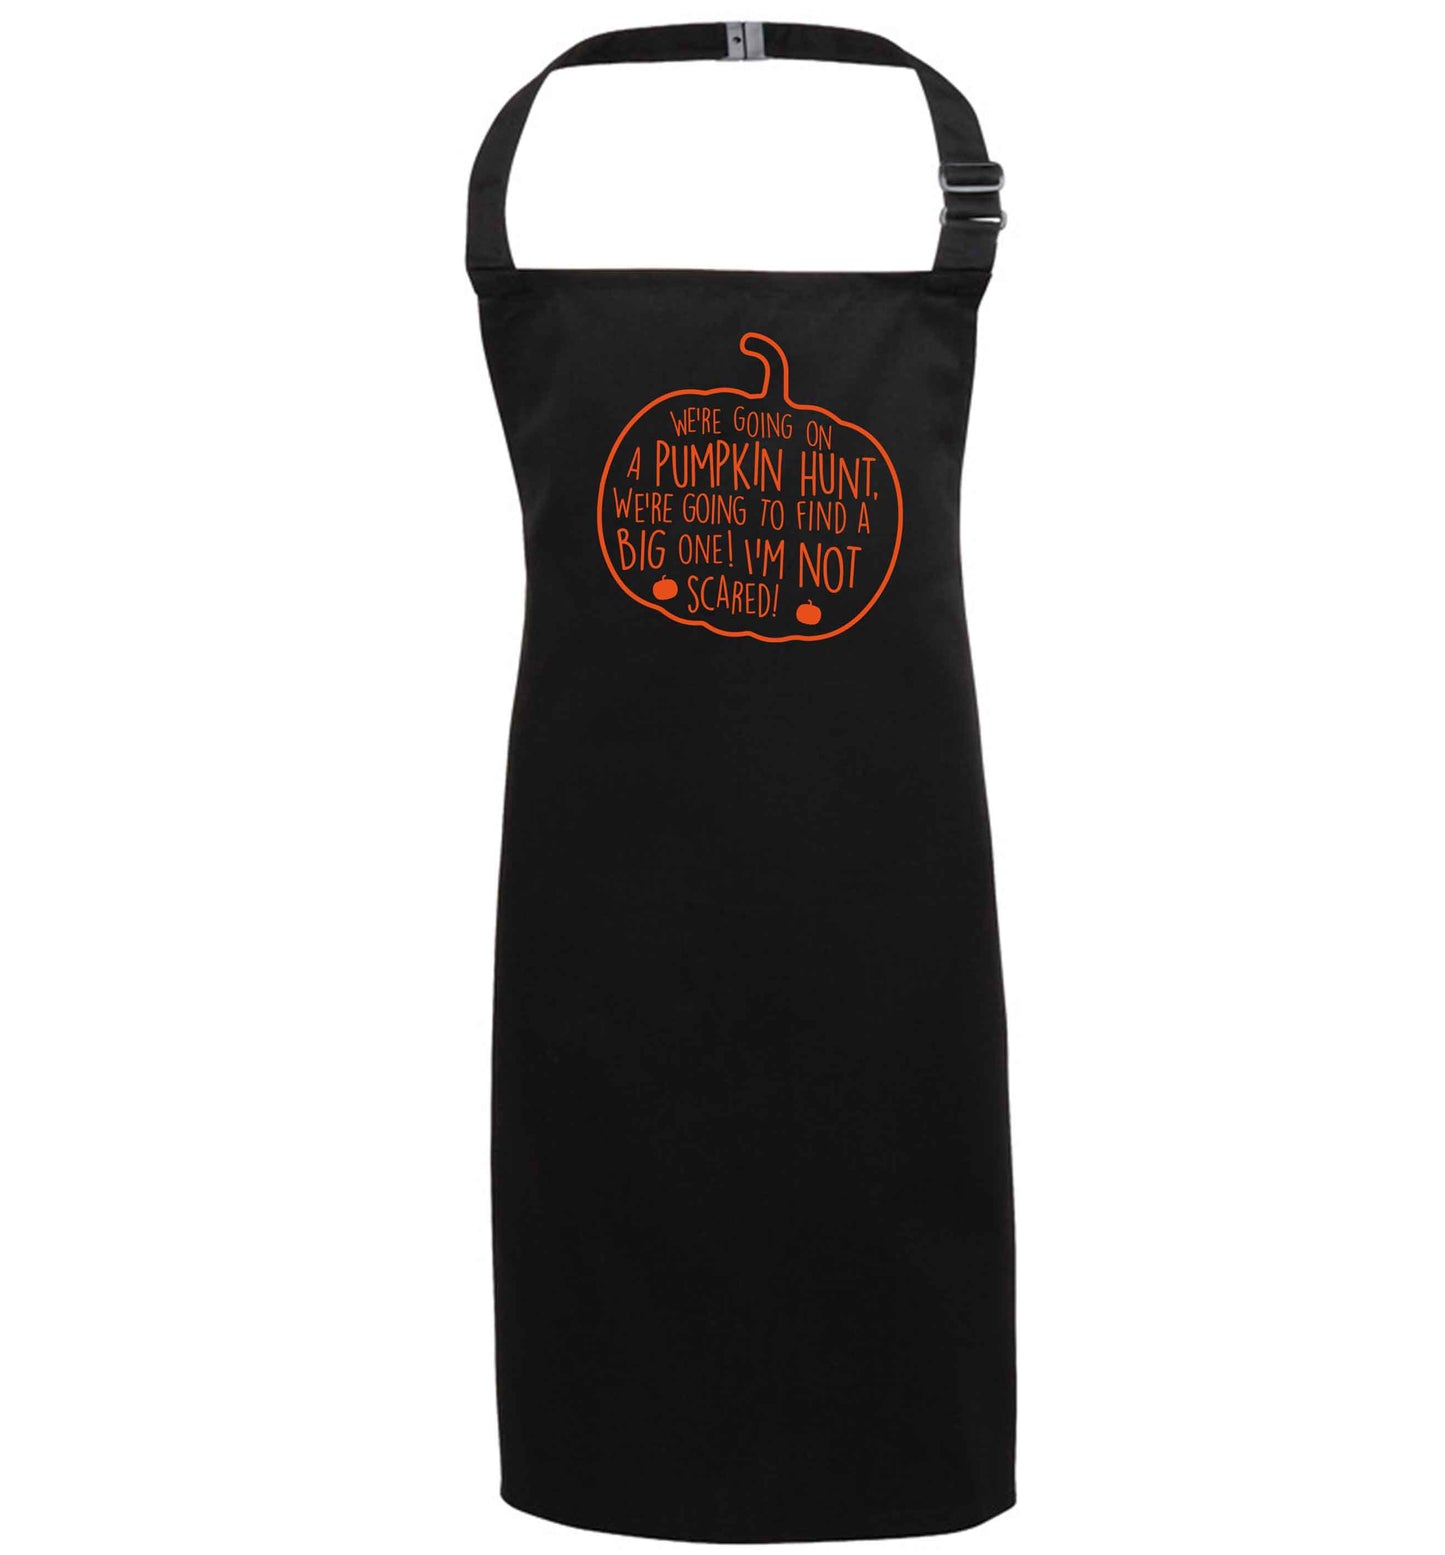 We're going on a pumpkin hunt black apron 7-10 years